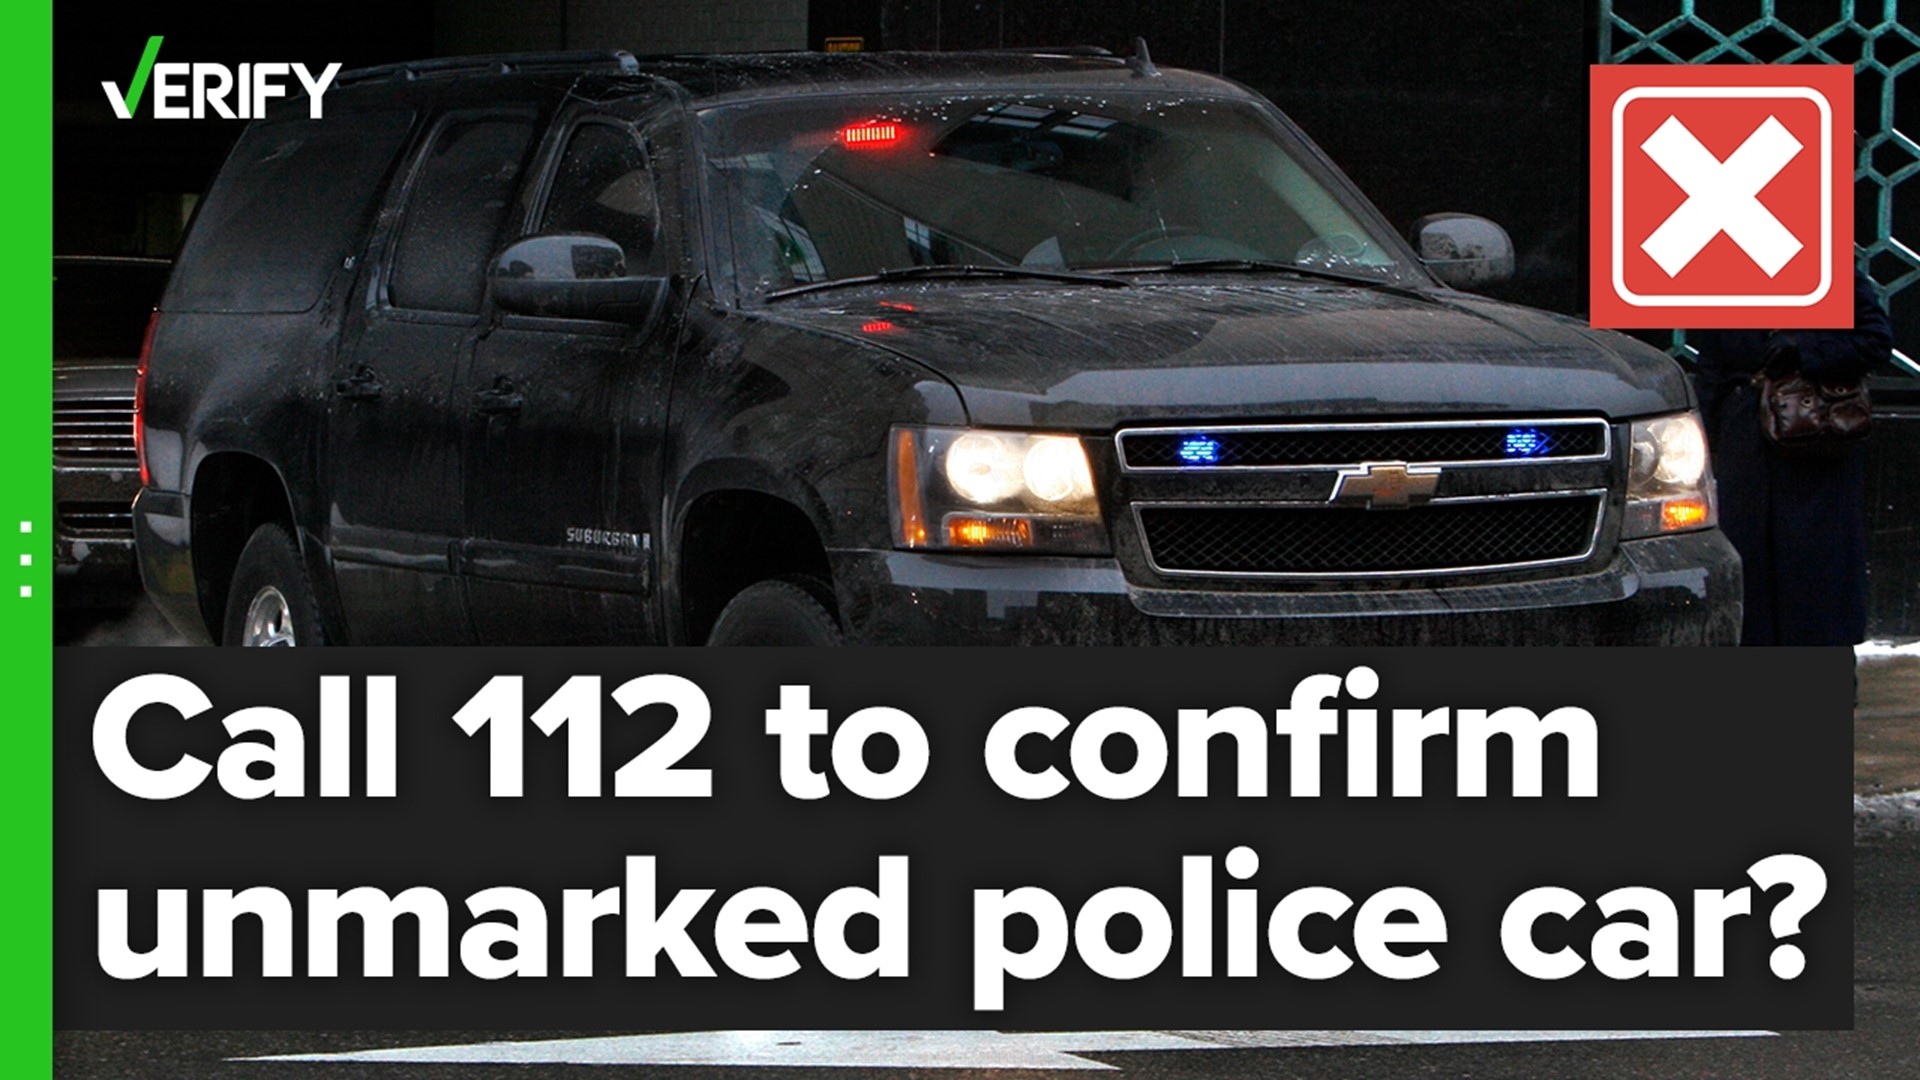 You should not call 112 to confirm the identity of an unmarked police car. The only phone number to contact law enforcement that’s consistent everywhere is 911.